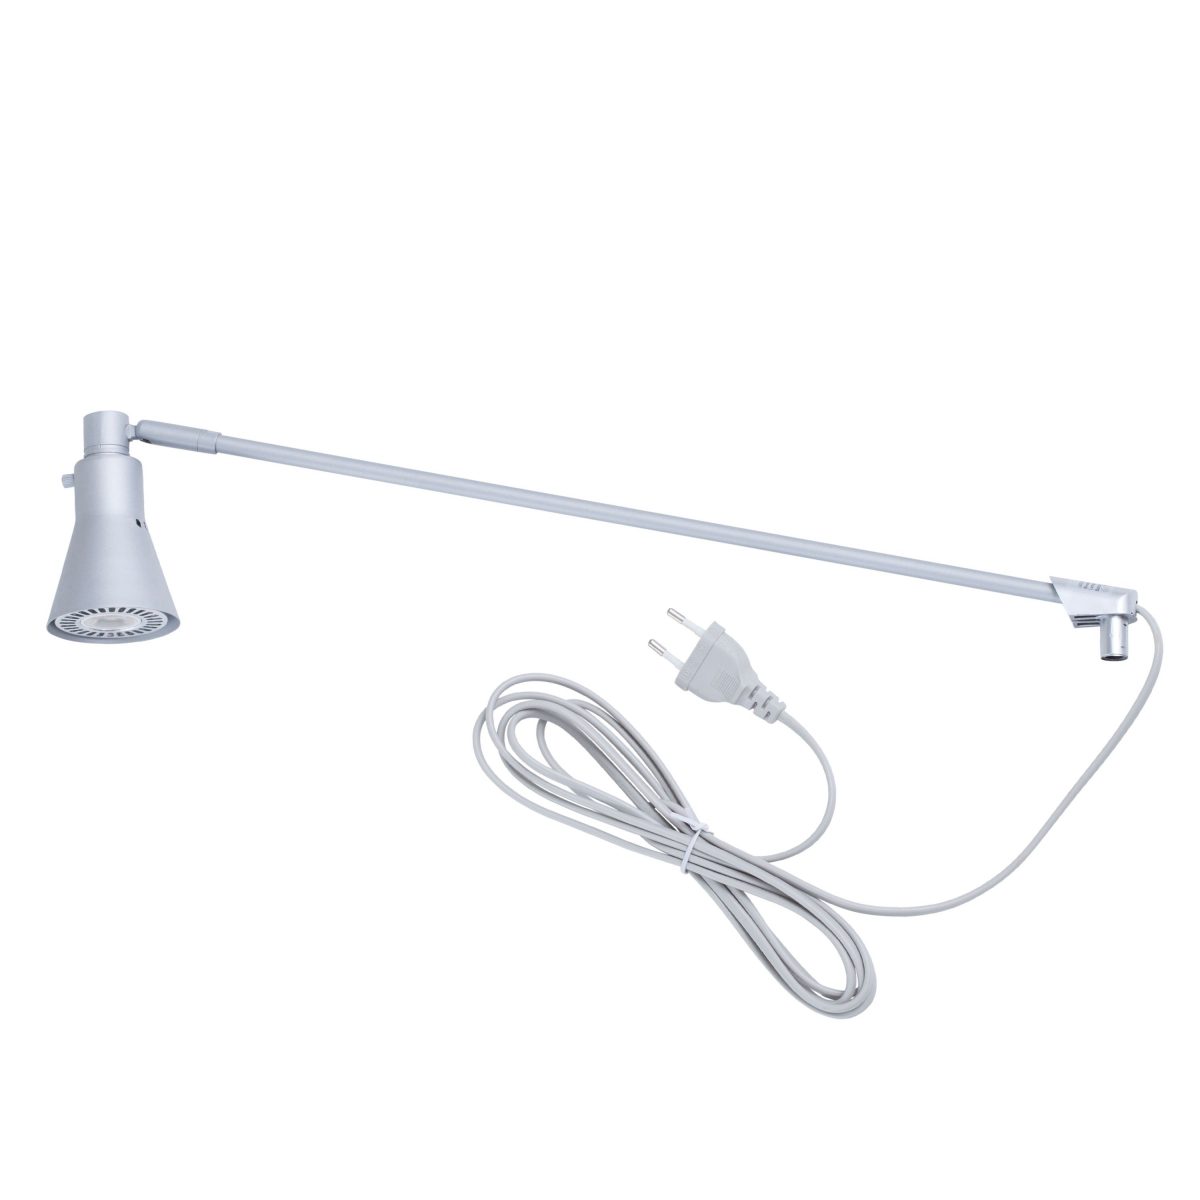 Roll-up banner lamp